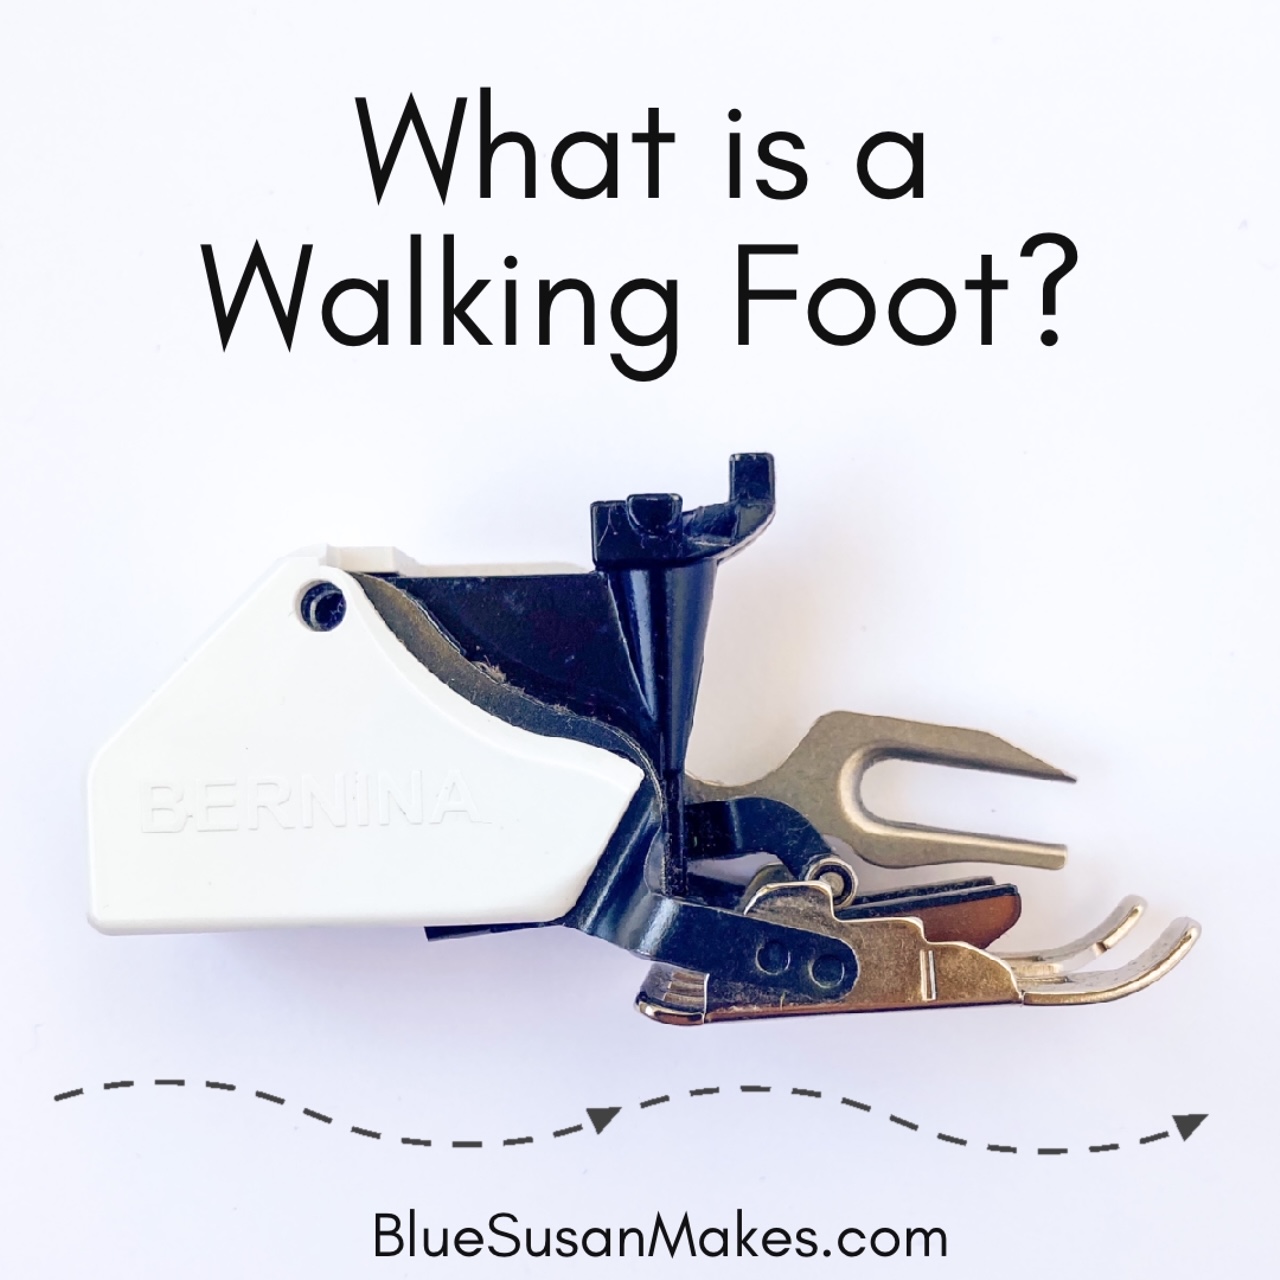 Blue Susan Makes: What is a Walking Foot?